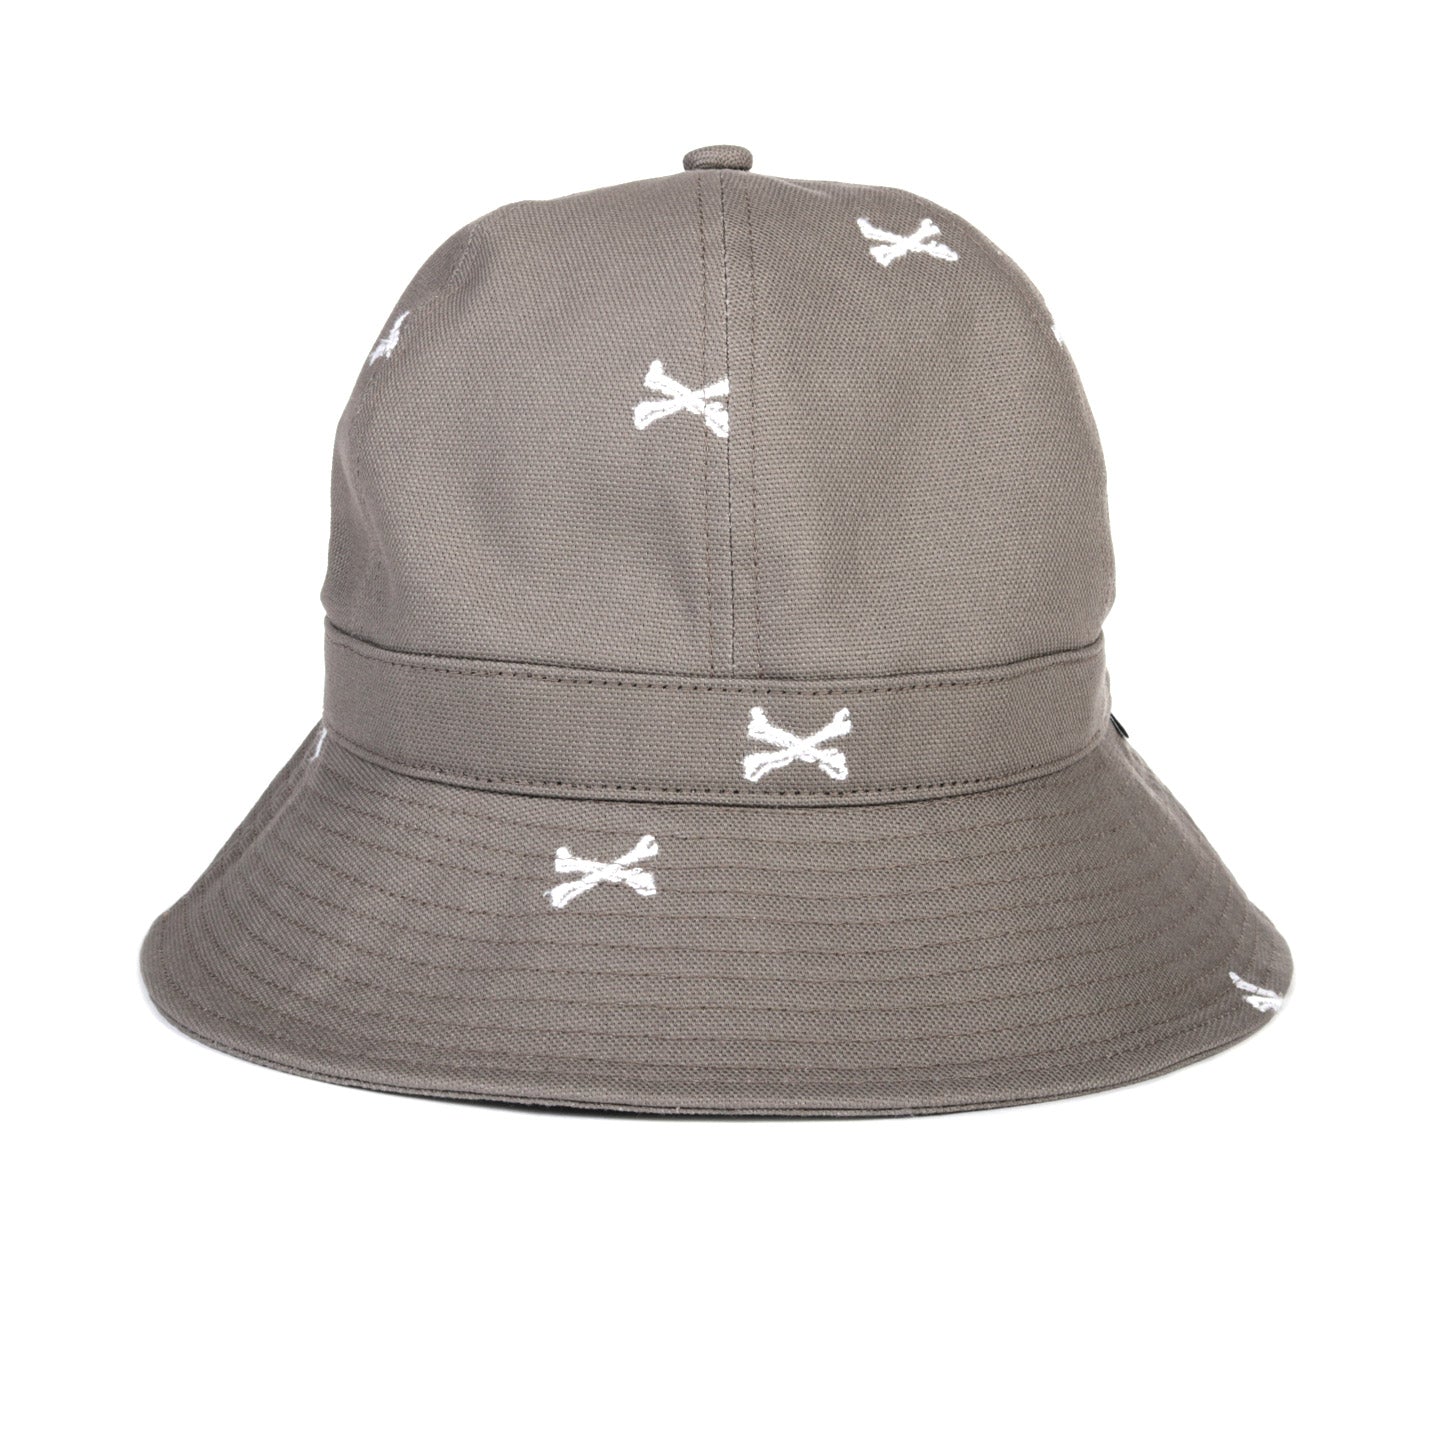 WTAPS BALL 01 HAT COTTON OXFORD TEXTILEメンズ - www.win360gifts.com